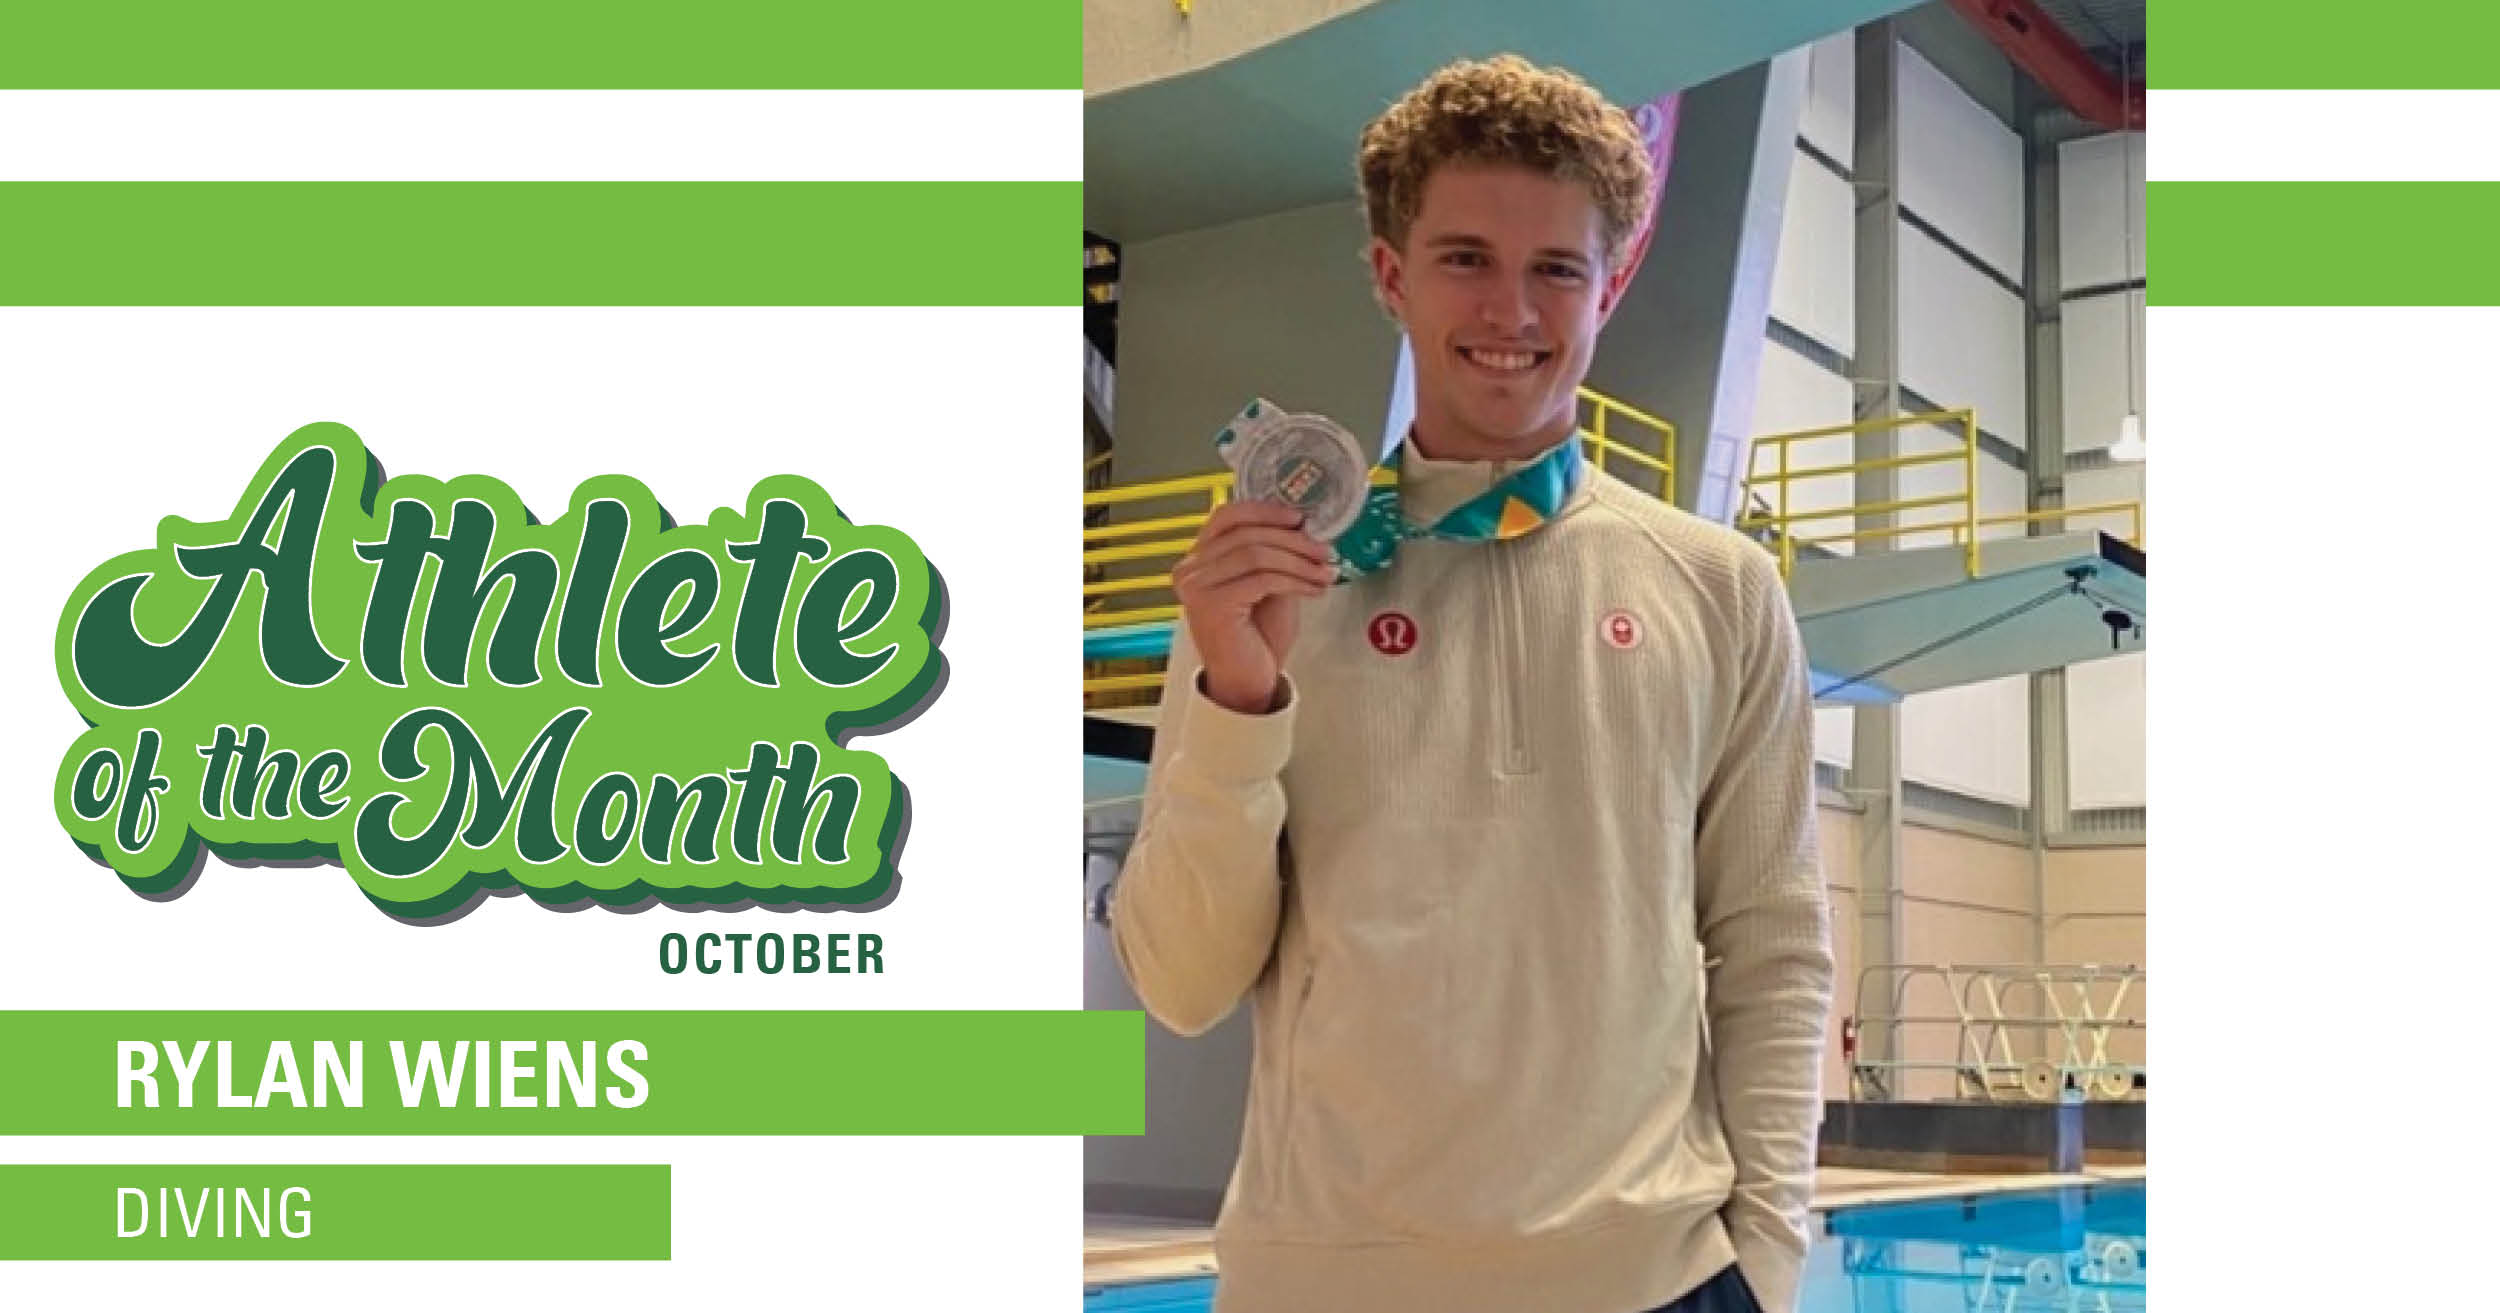 Rylan Wiens dives into October Athlete of the Month  